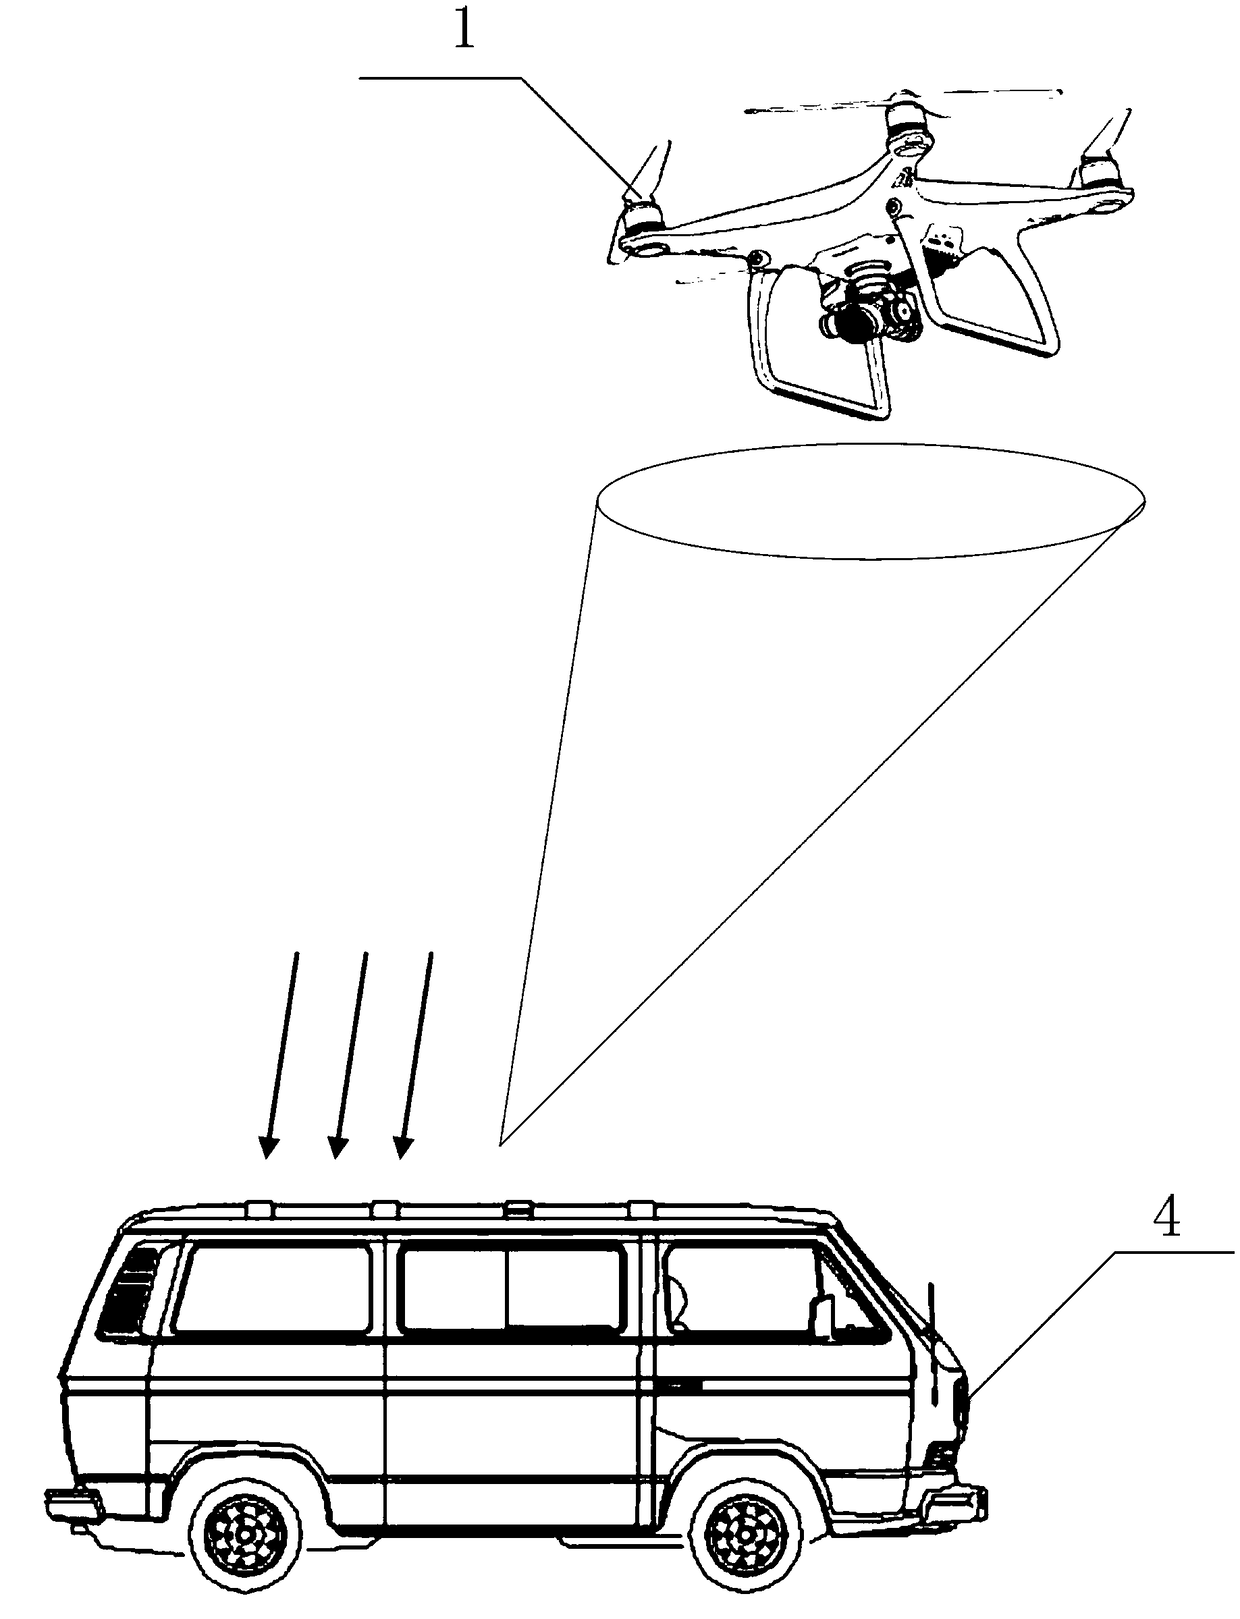 Vehicle-mounted rotor wing unmanned aerial vehicle recovery guide system and method based on millimeter wave radar